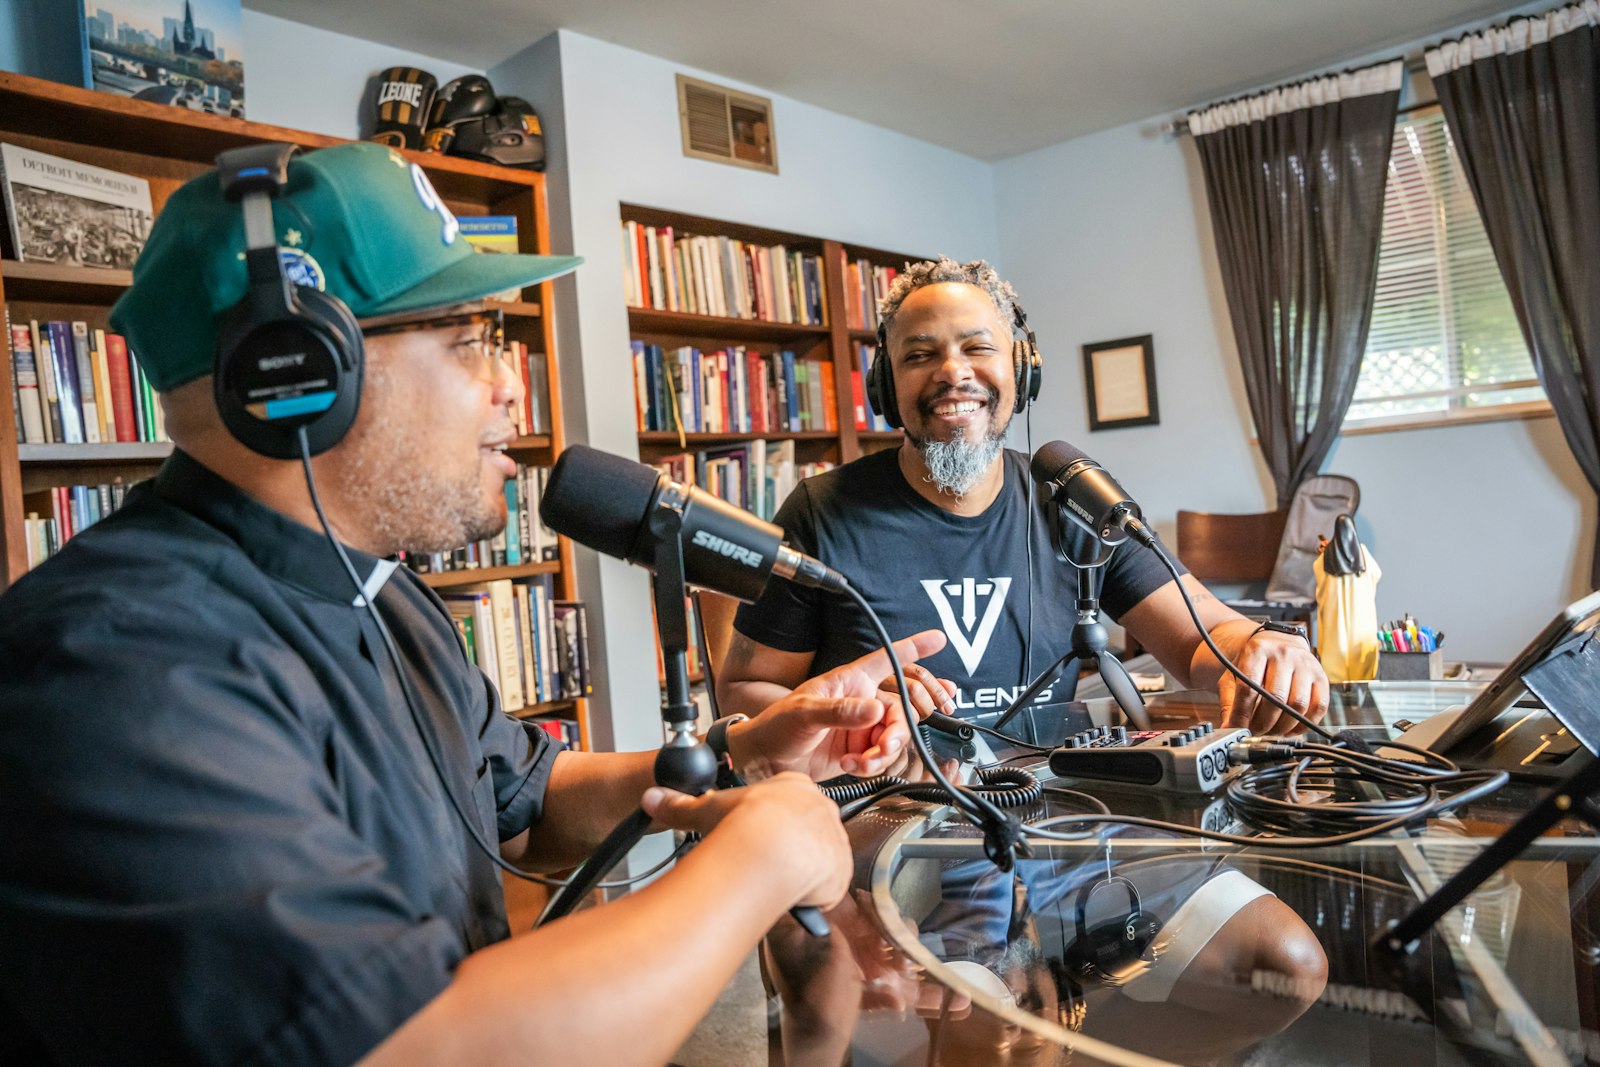 Fr. McKenzie and Smith record an episode in Fr. McKenzie's office at Christ the King Parish in Detroit. The podcast's tone is down to earth, but the content dives deep, going into personal testimonies, the realities of fatherhood, and their lives as Black Catholic men living in Detroit.